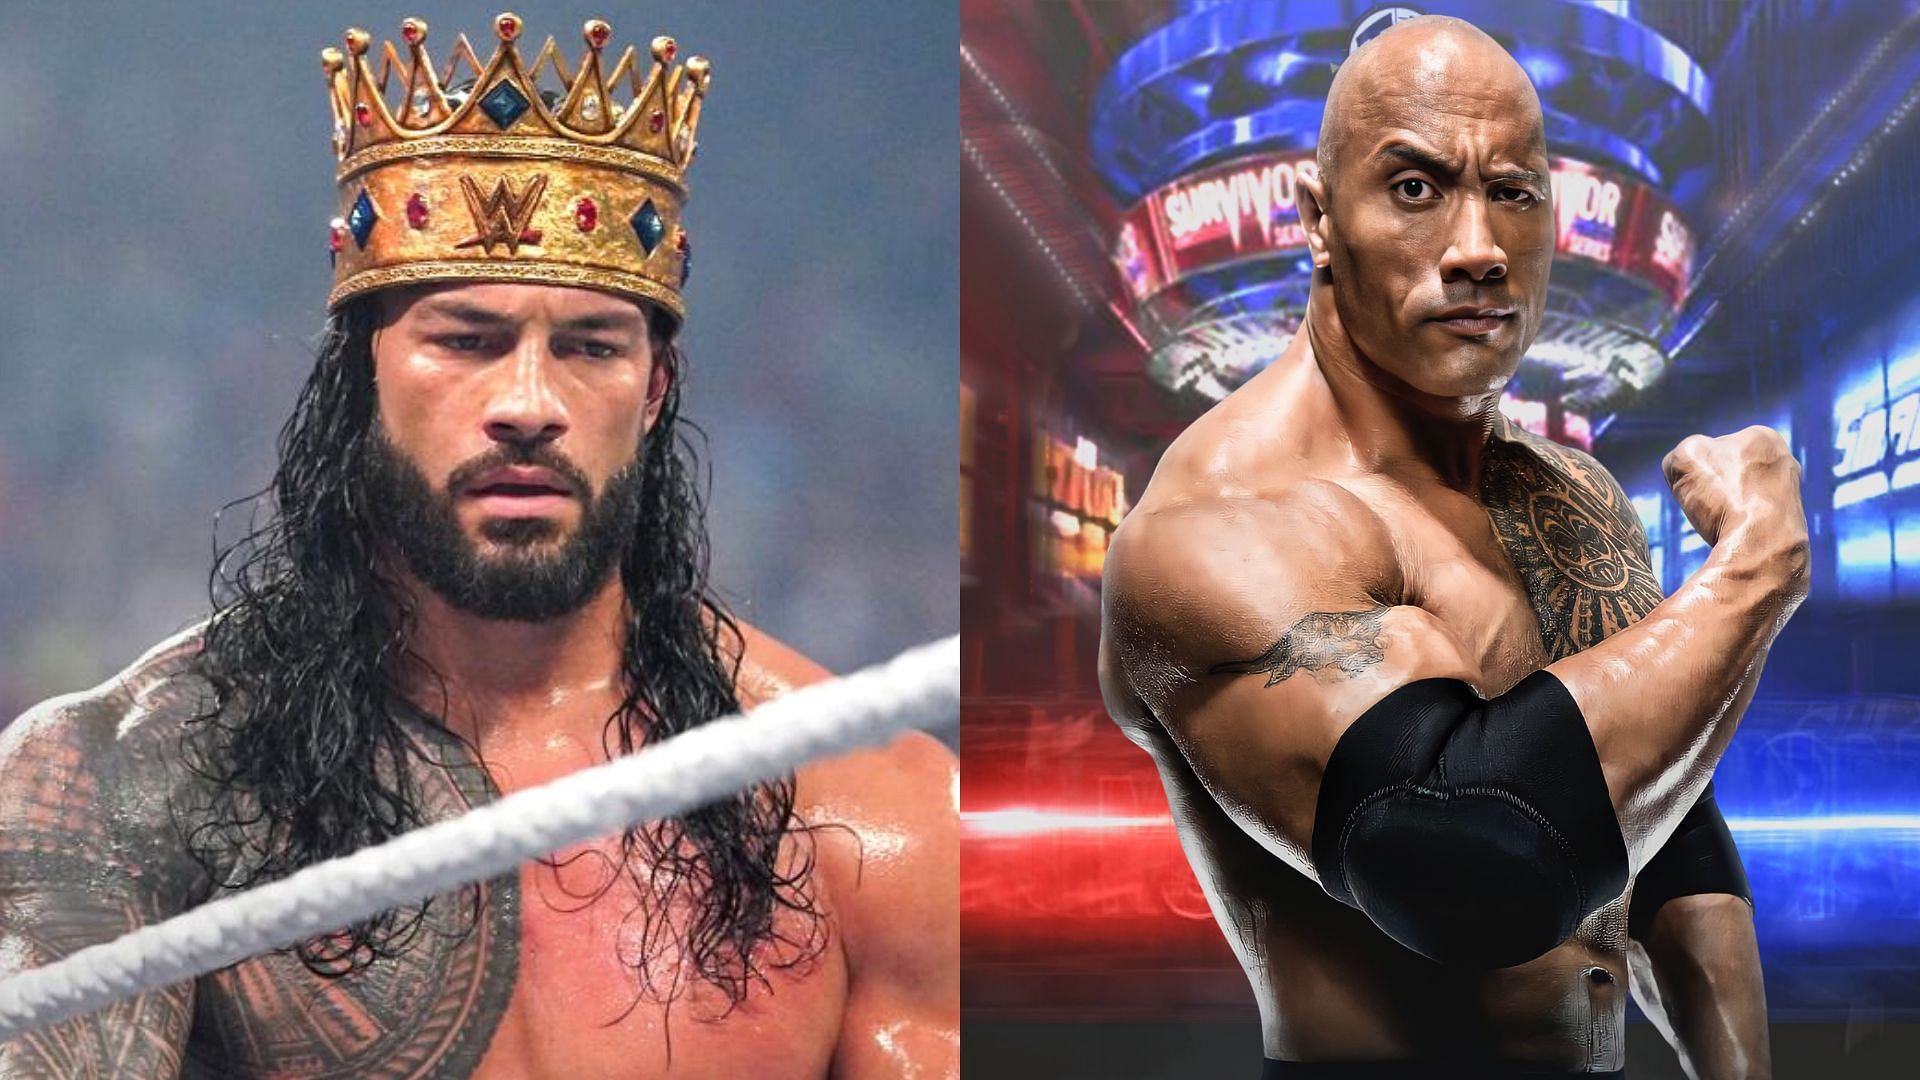 The Rock is rumored to show up at Survivor Series 2021